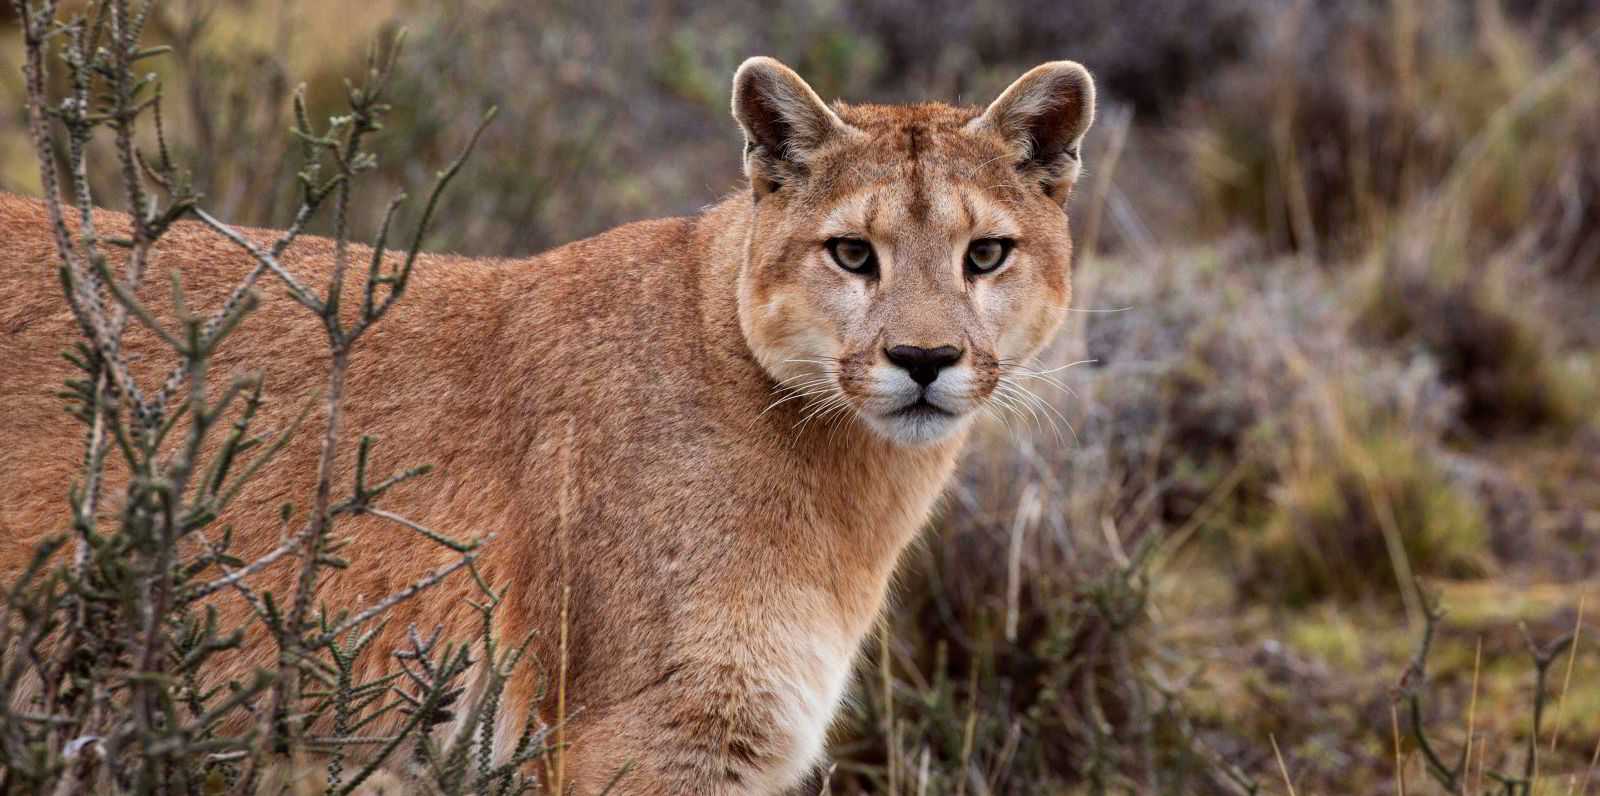 Puma West purrs: BP makes oil discovery at US Gulf wildcat